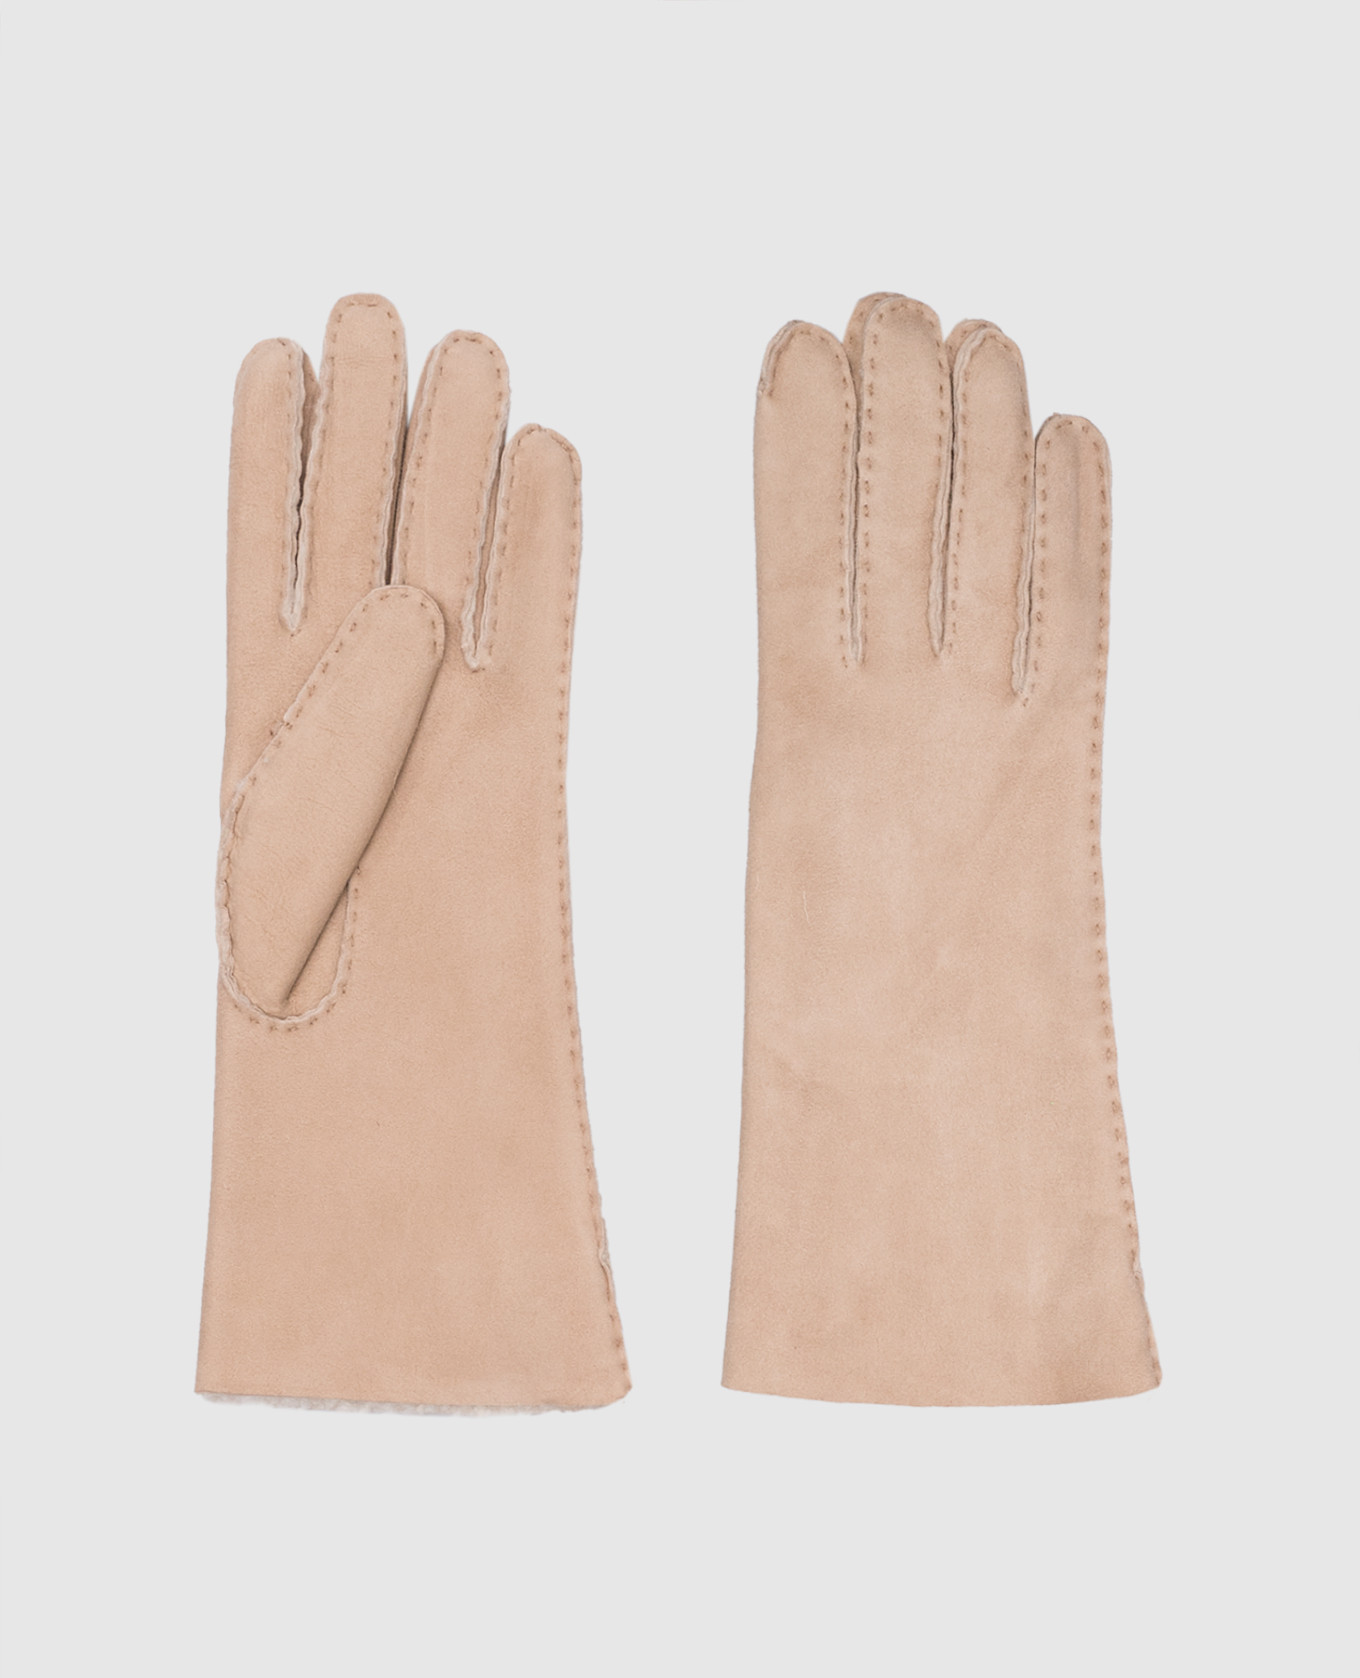 Gray suede gloves